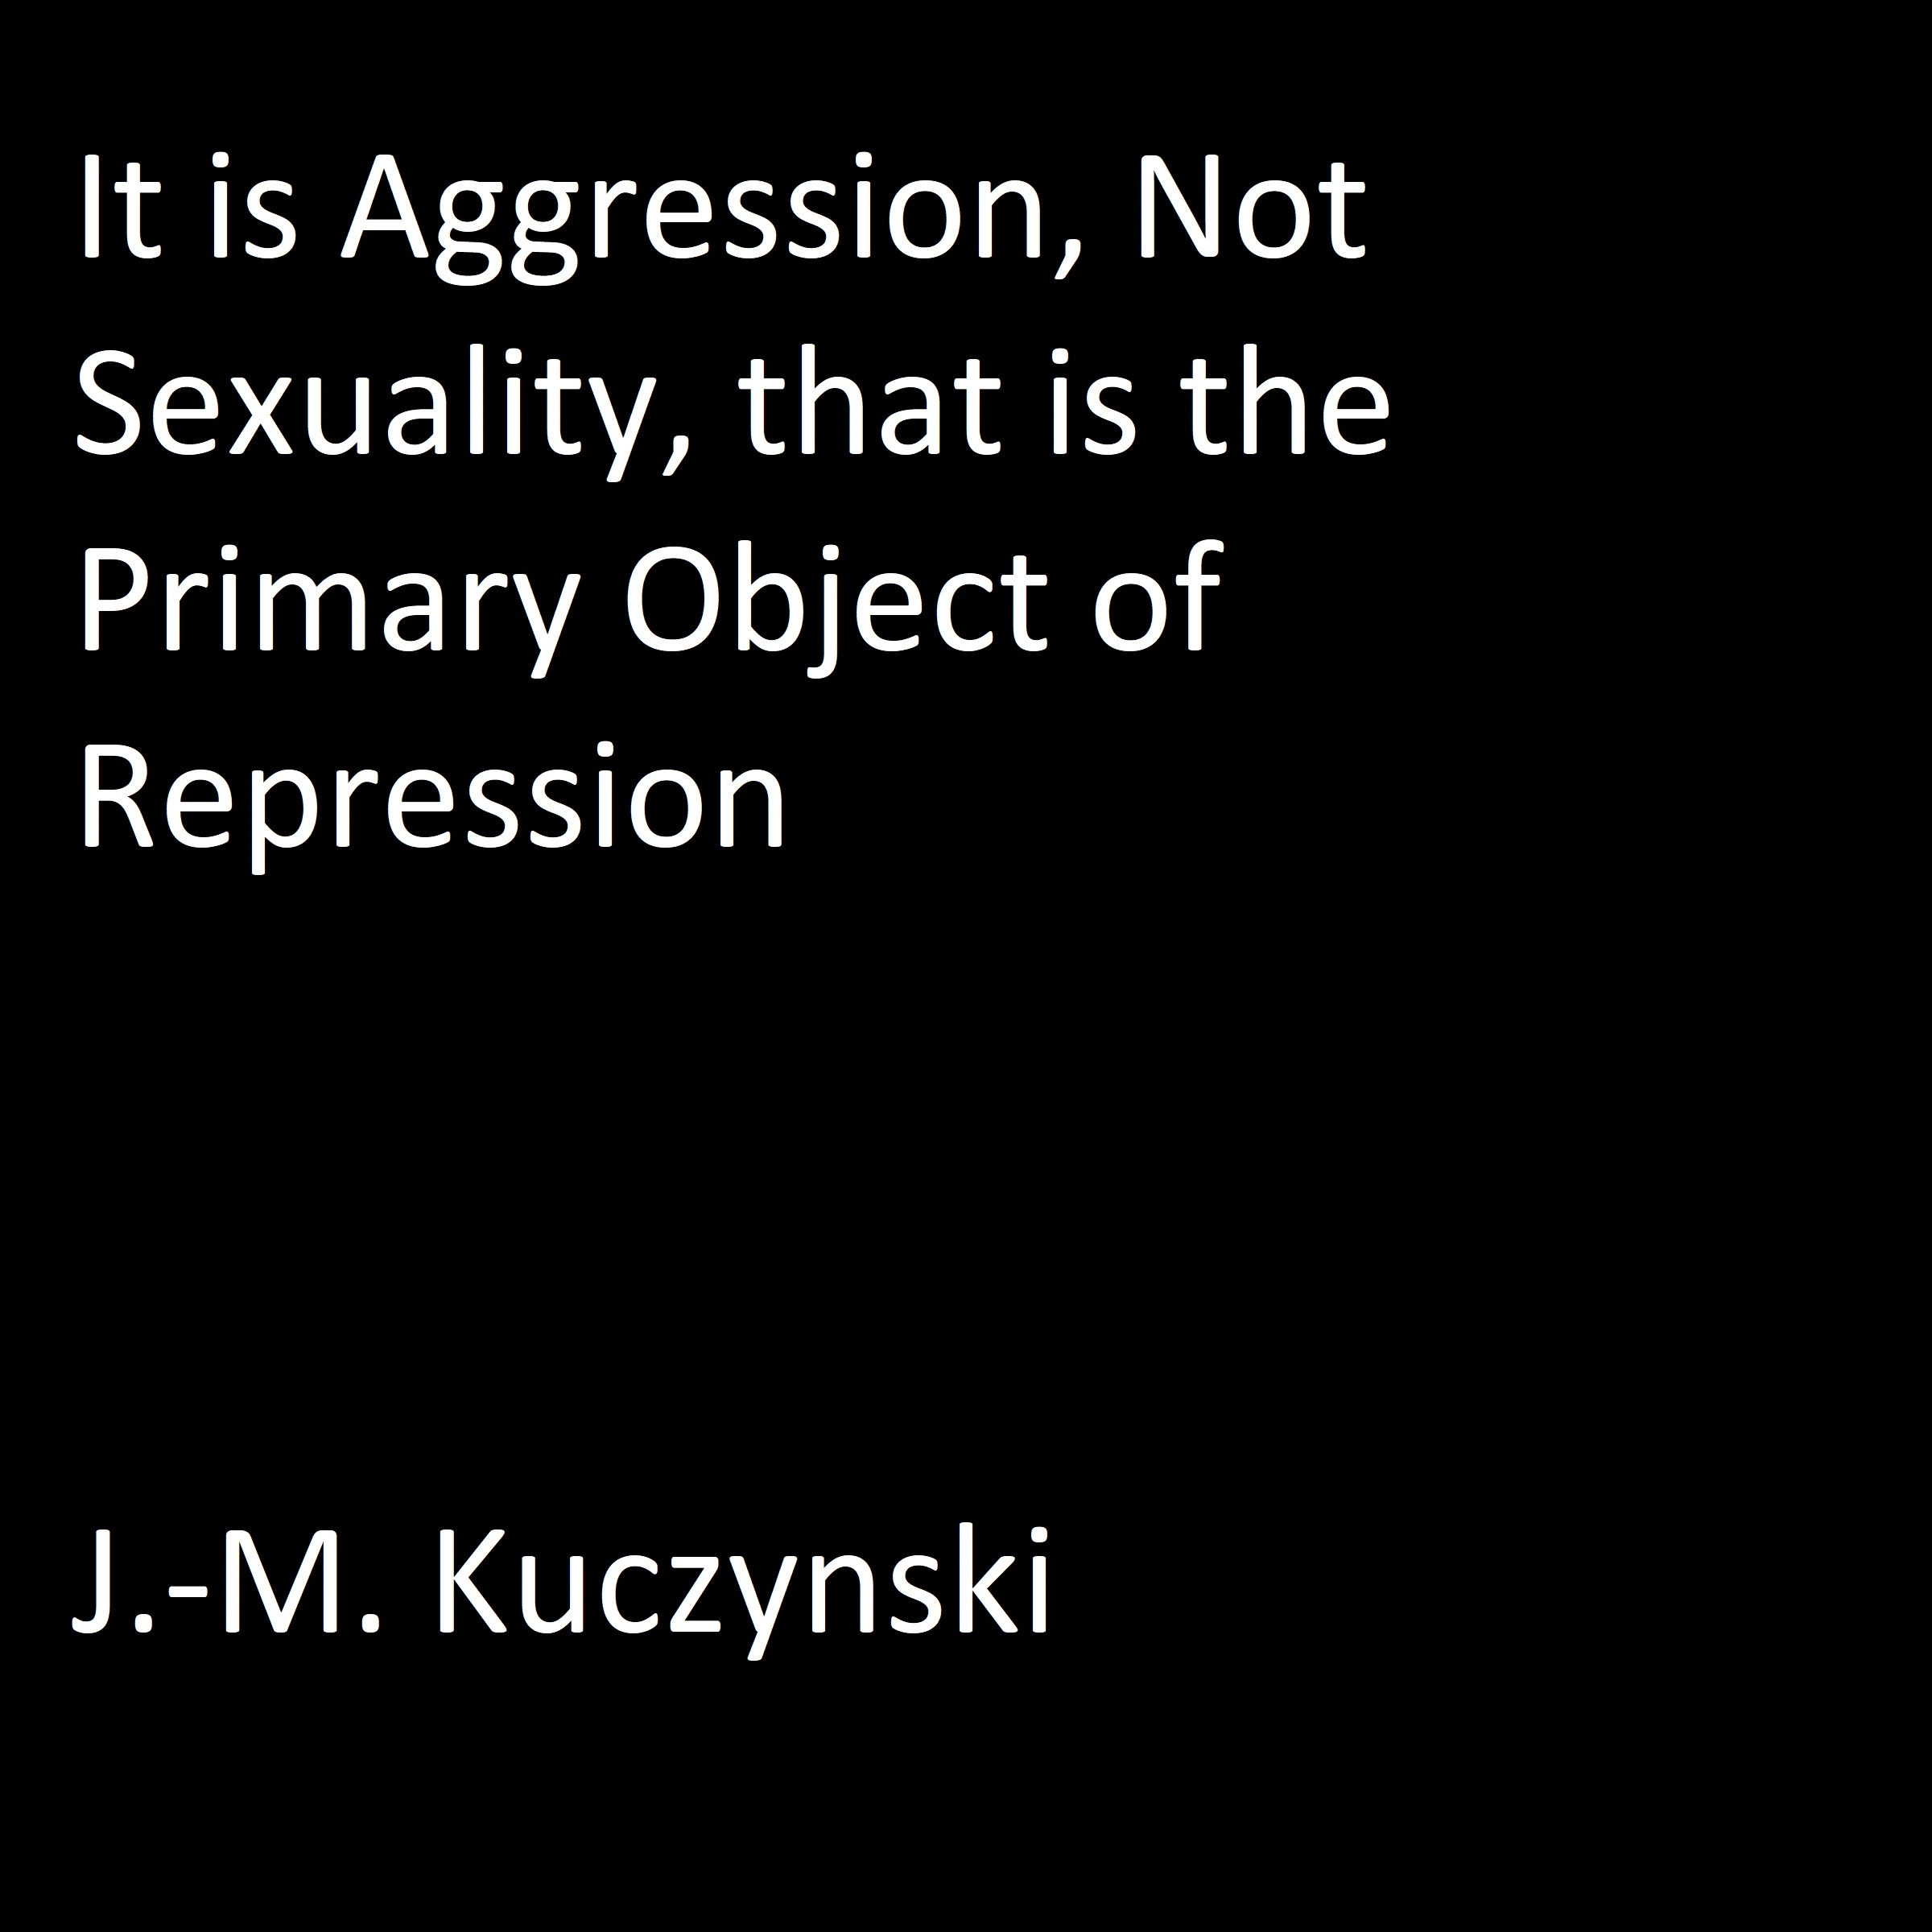 It is Aggression, not Sexuality, that is the Primary Object of Repression Audiobook by J.-M. Kuczynski